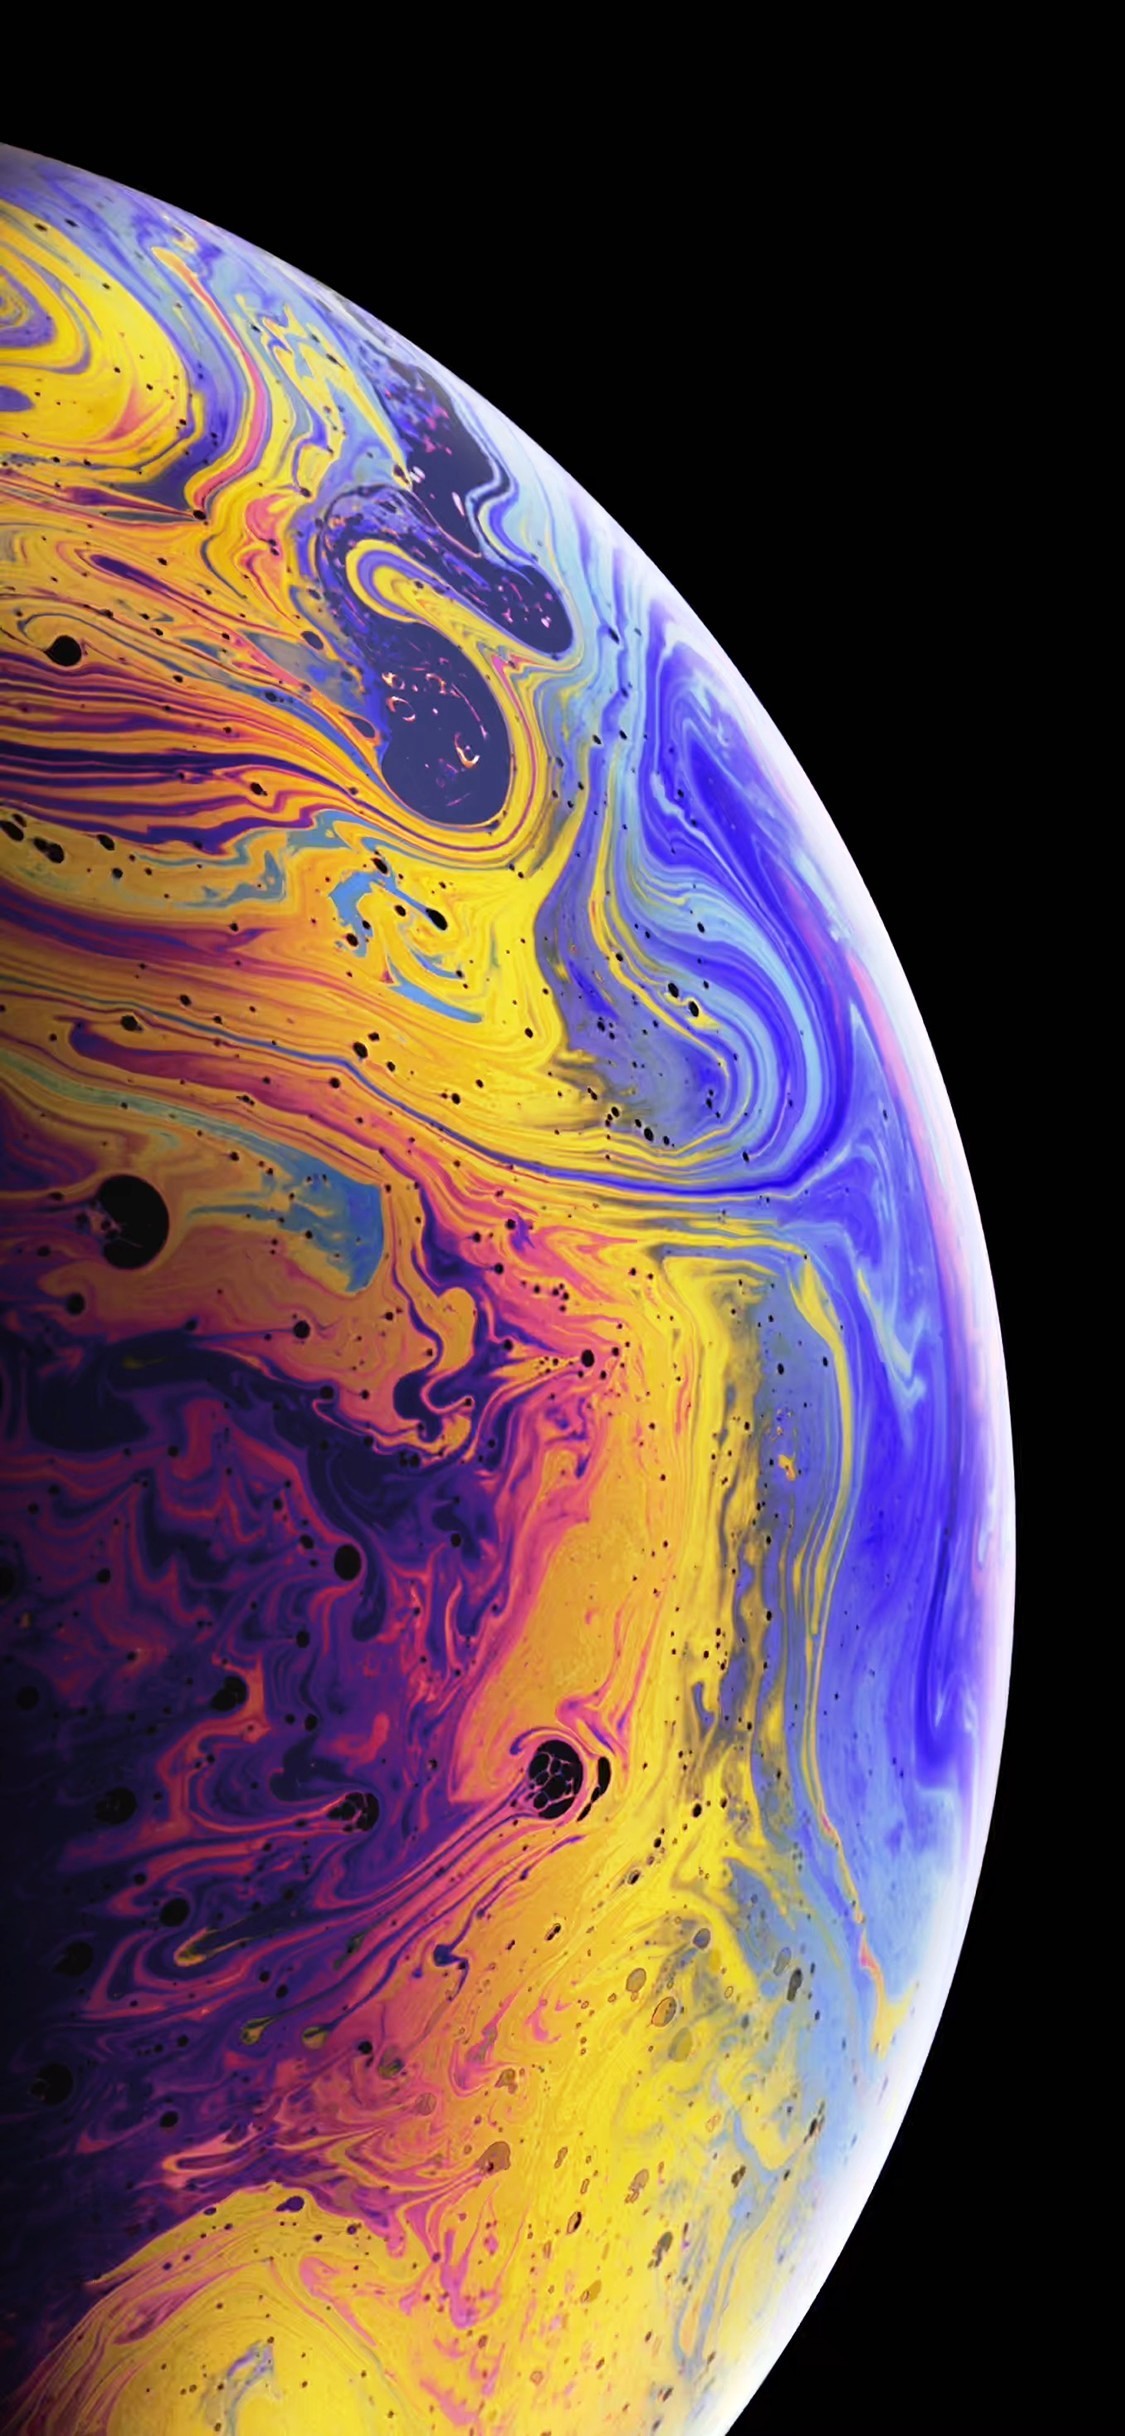 Iphone Xs Wallpaper In Hd With High-resolution Pixel - Dynamic Wallpapers Iphone Xr - HD Wallpaper 